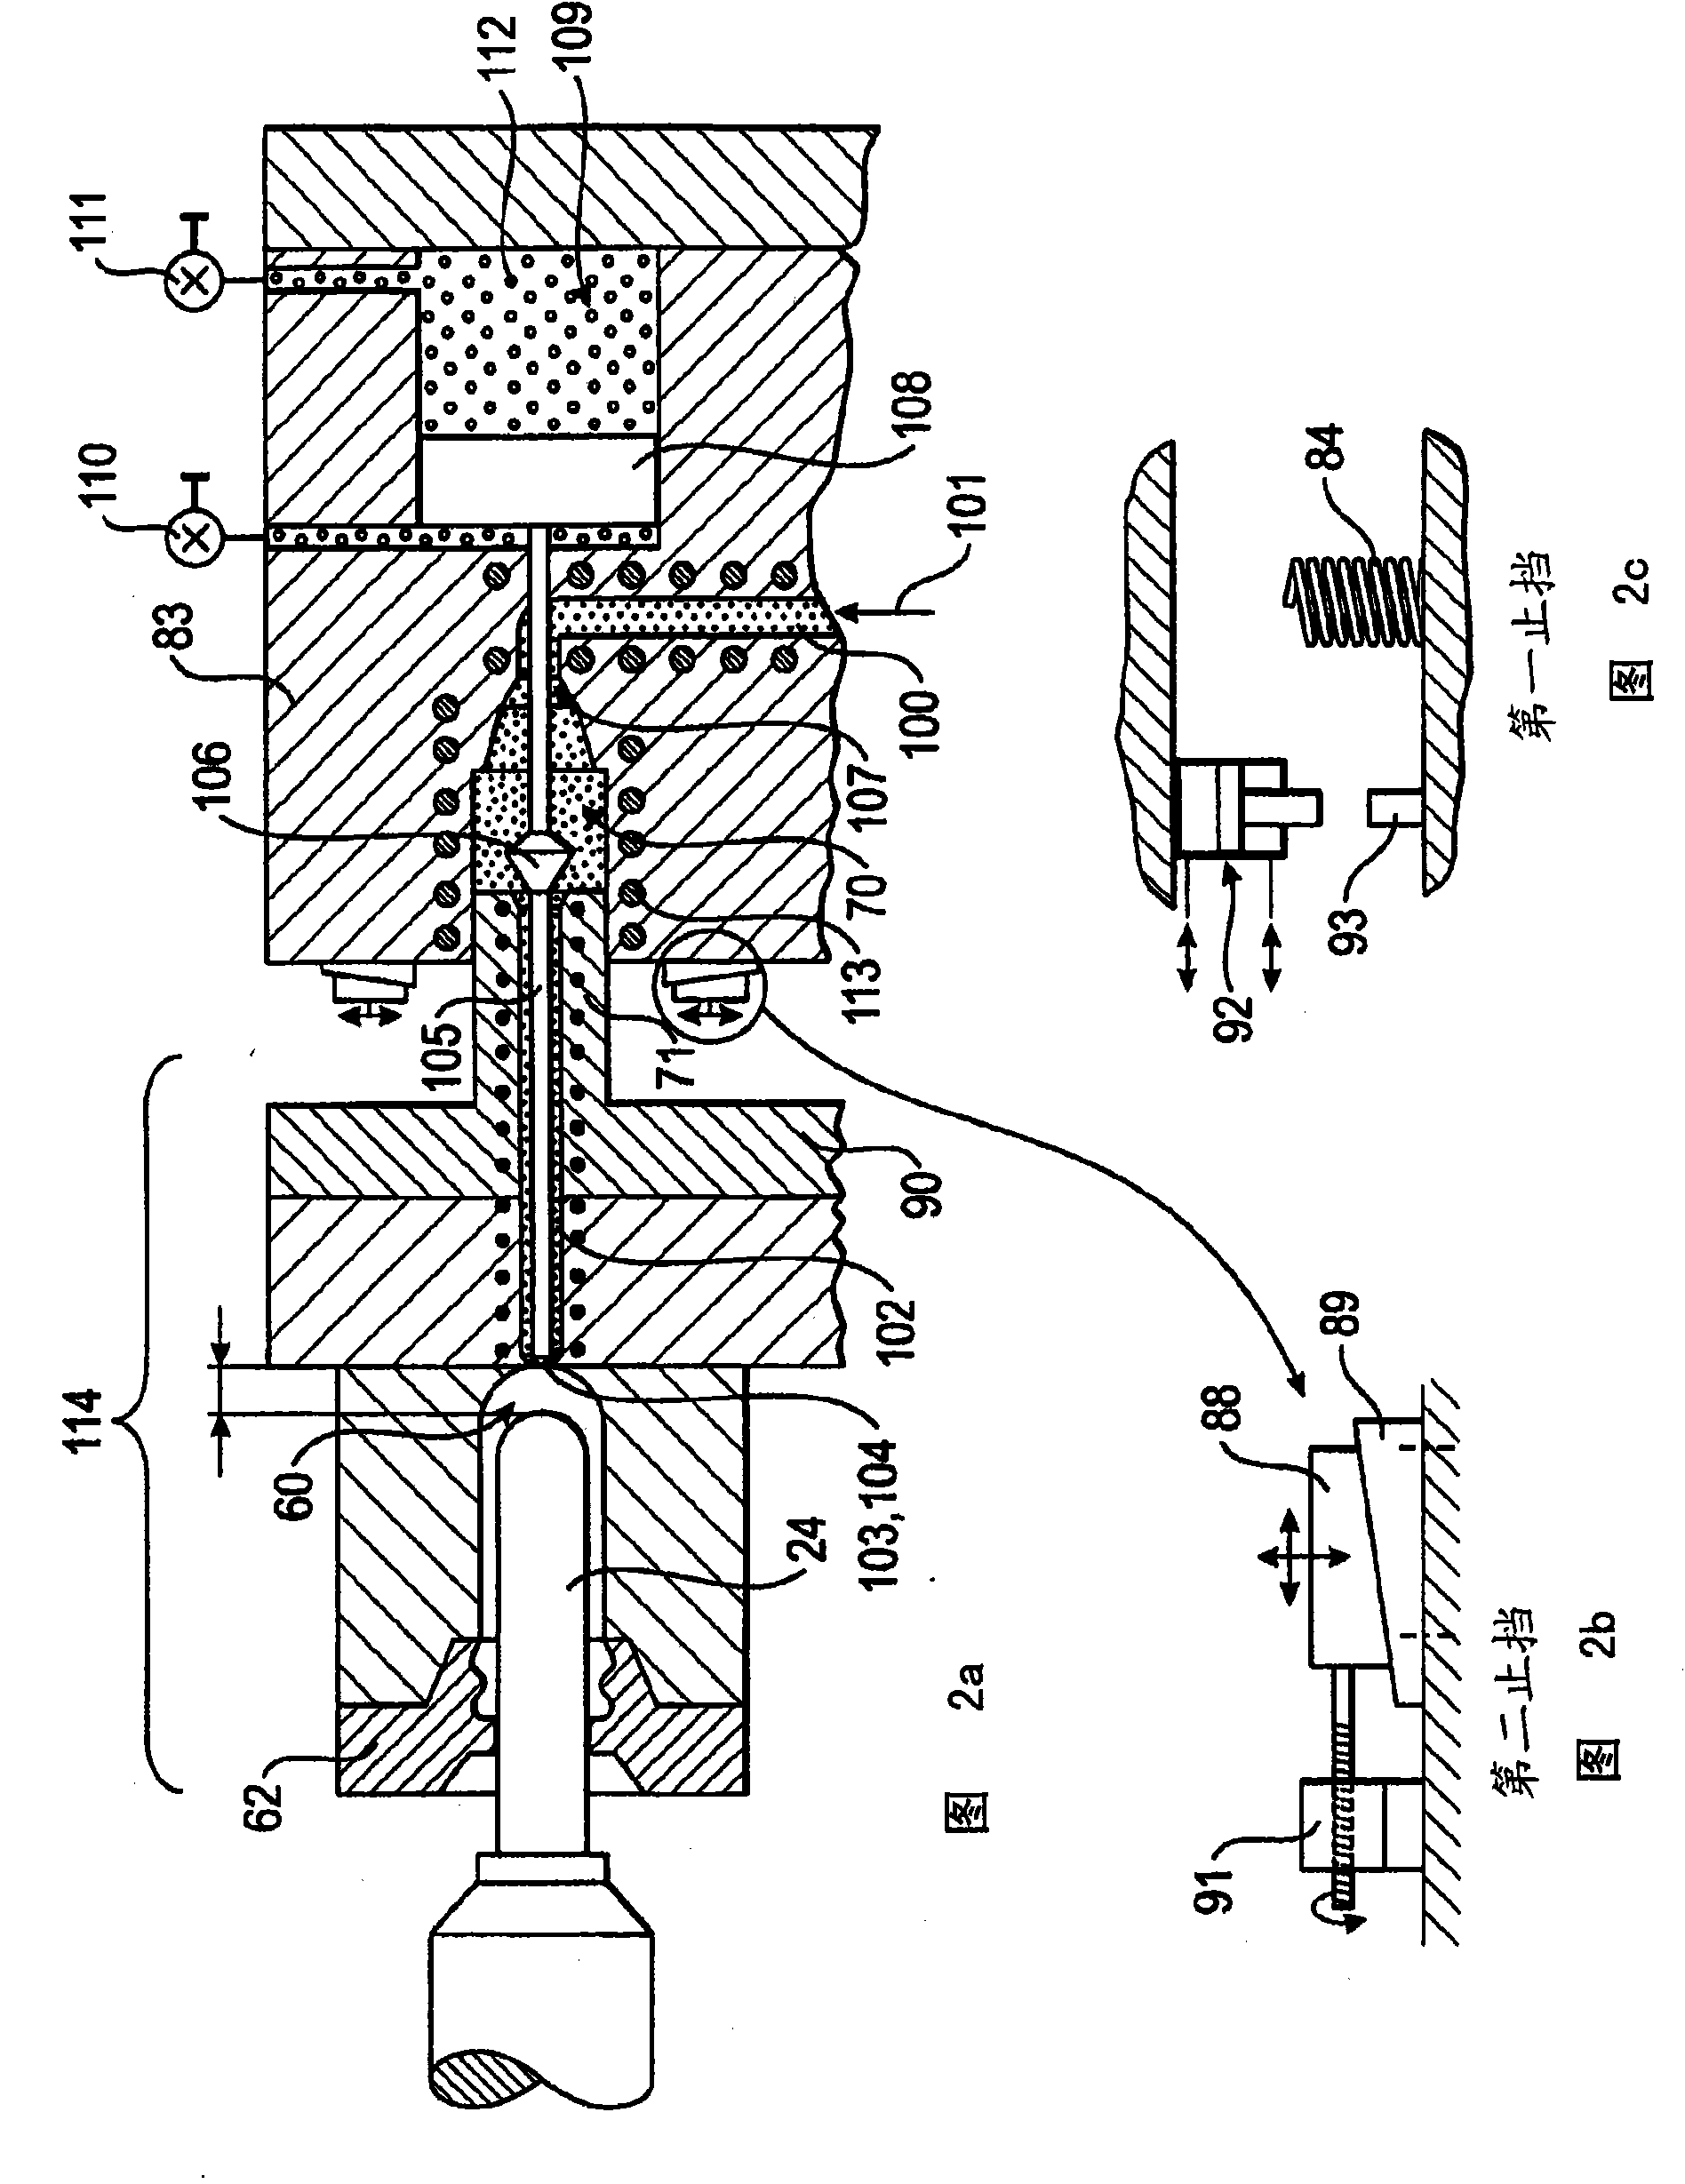 Compression injection moulding method and device for preforms